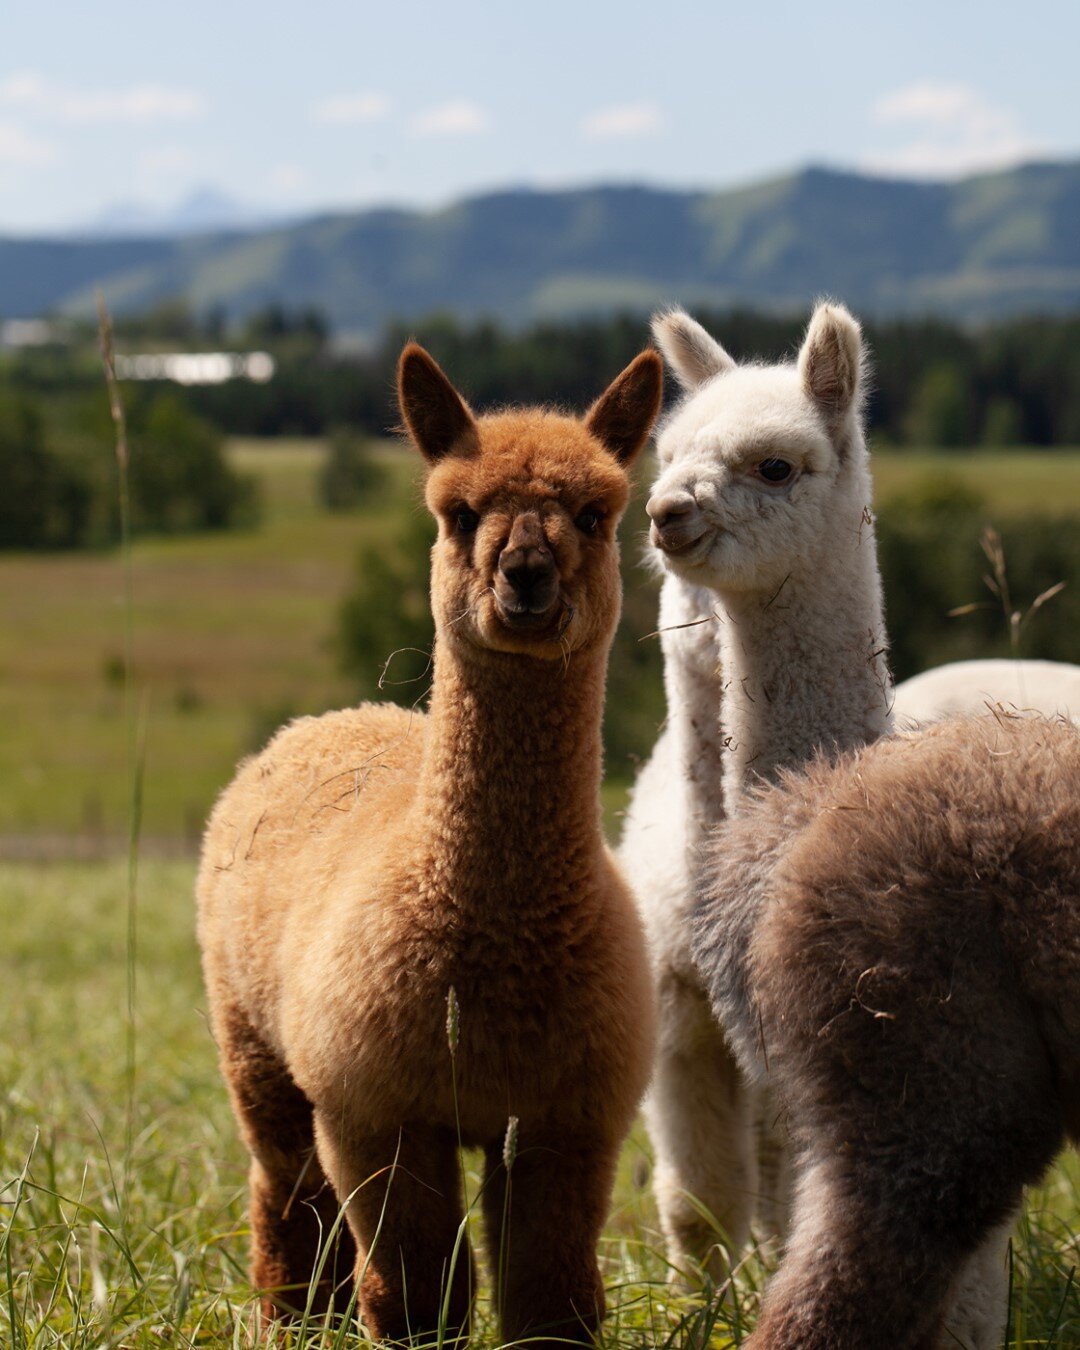 Alpaca Duvets!! We are excited to let you know we are know carrying Alpaca duvets.  Alpaca fibre is two times warmer than wool, hypoallergenic, lightweight, breathable, and durable. You are sure to be cozy &amp; get a good night&rsquo;s sleep tucked 